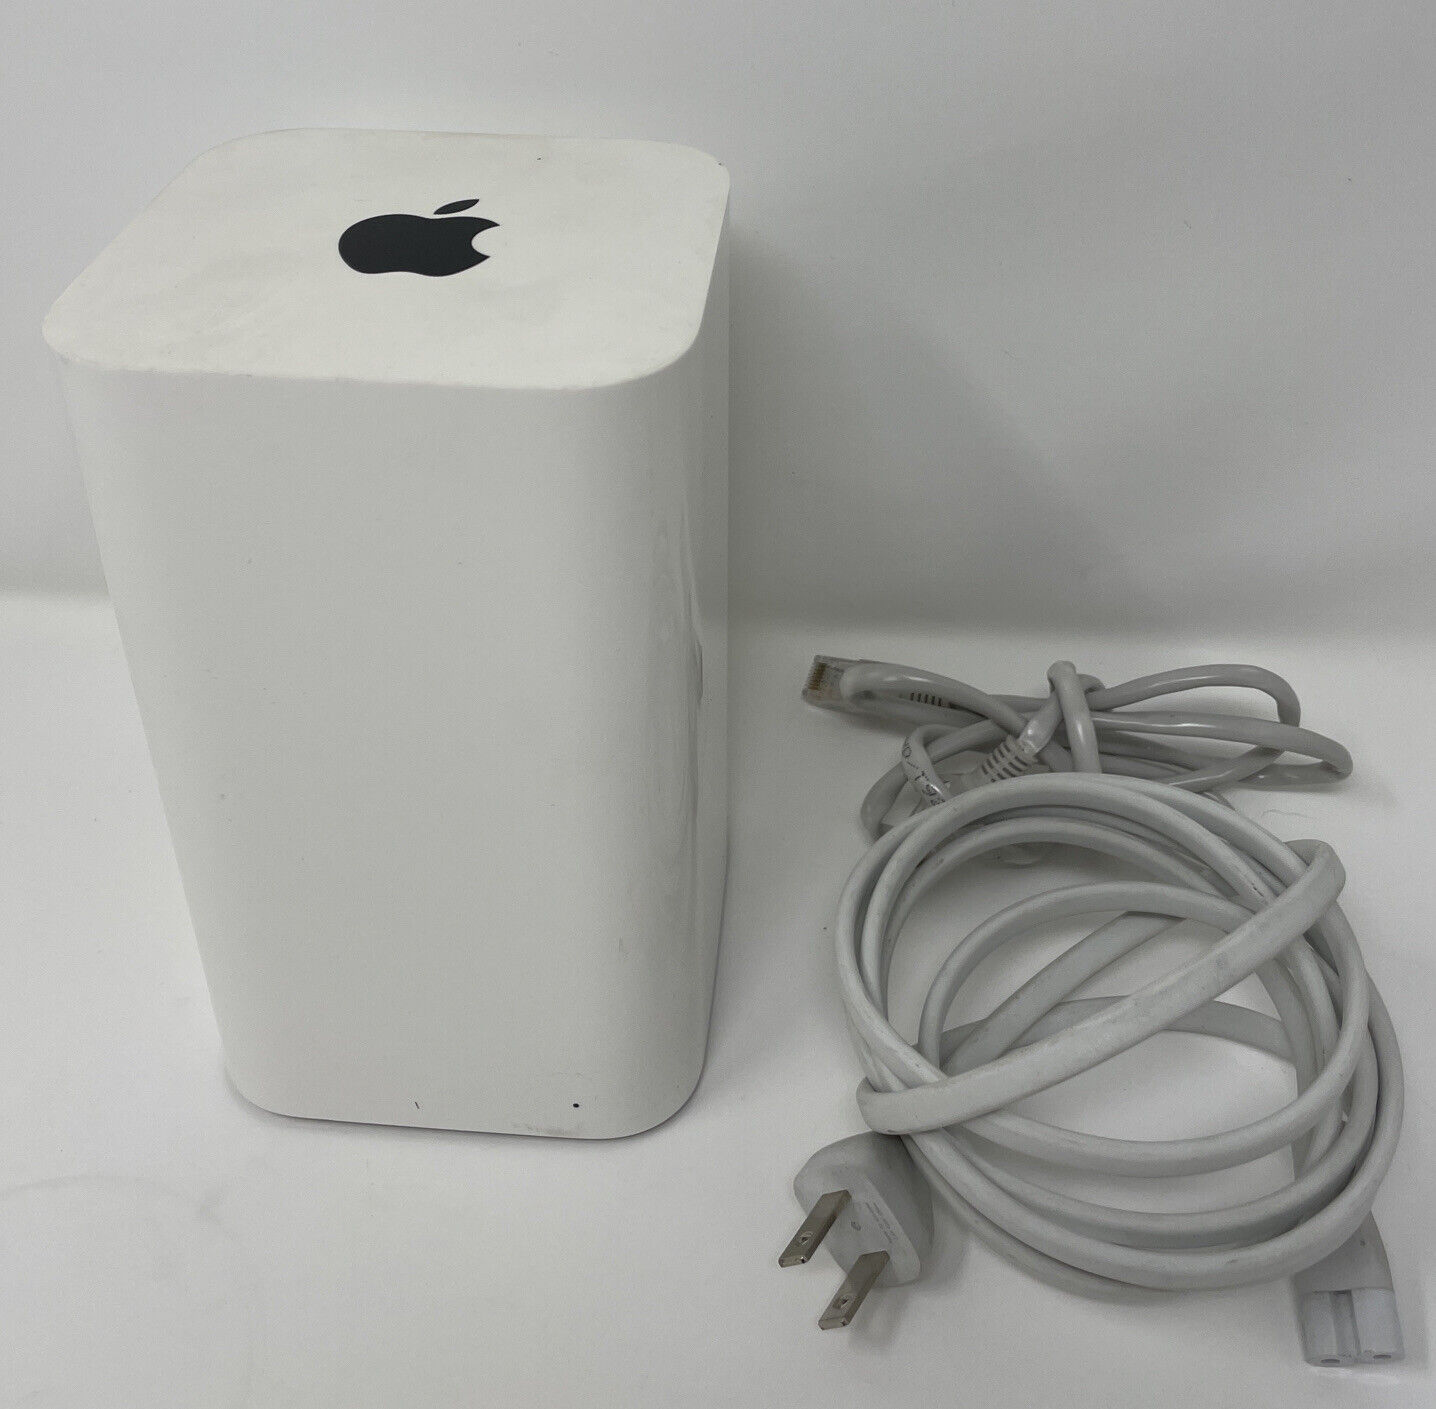 Apple Airport Extreme Wi-Fi Router With Power Cord Model A1521 TESTED